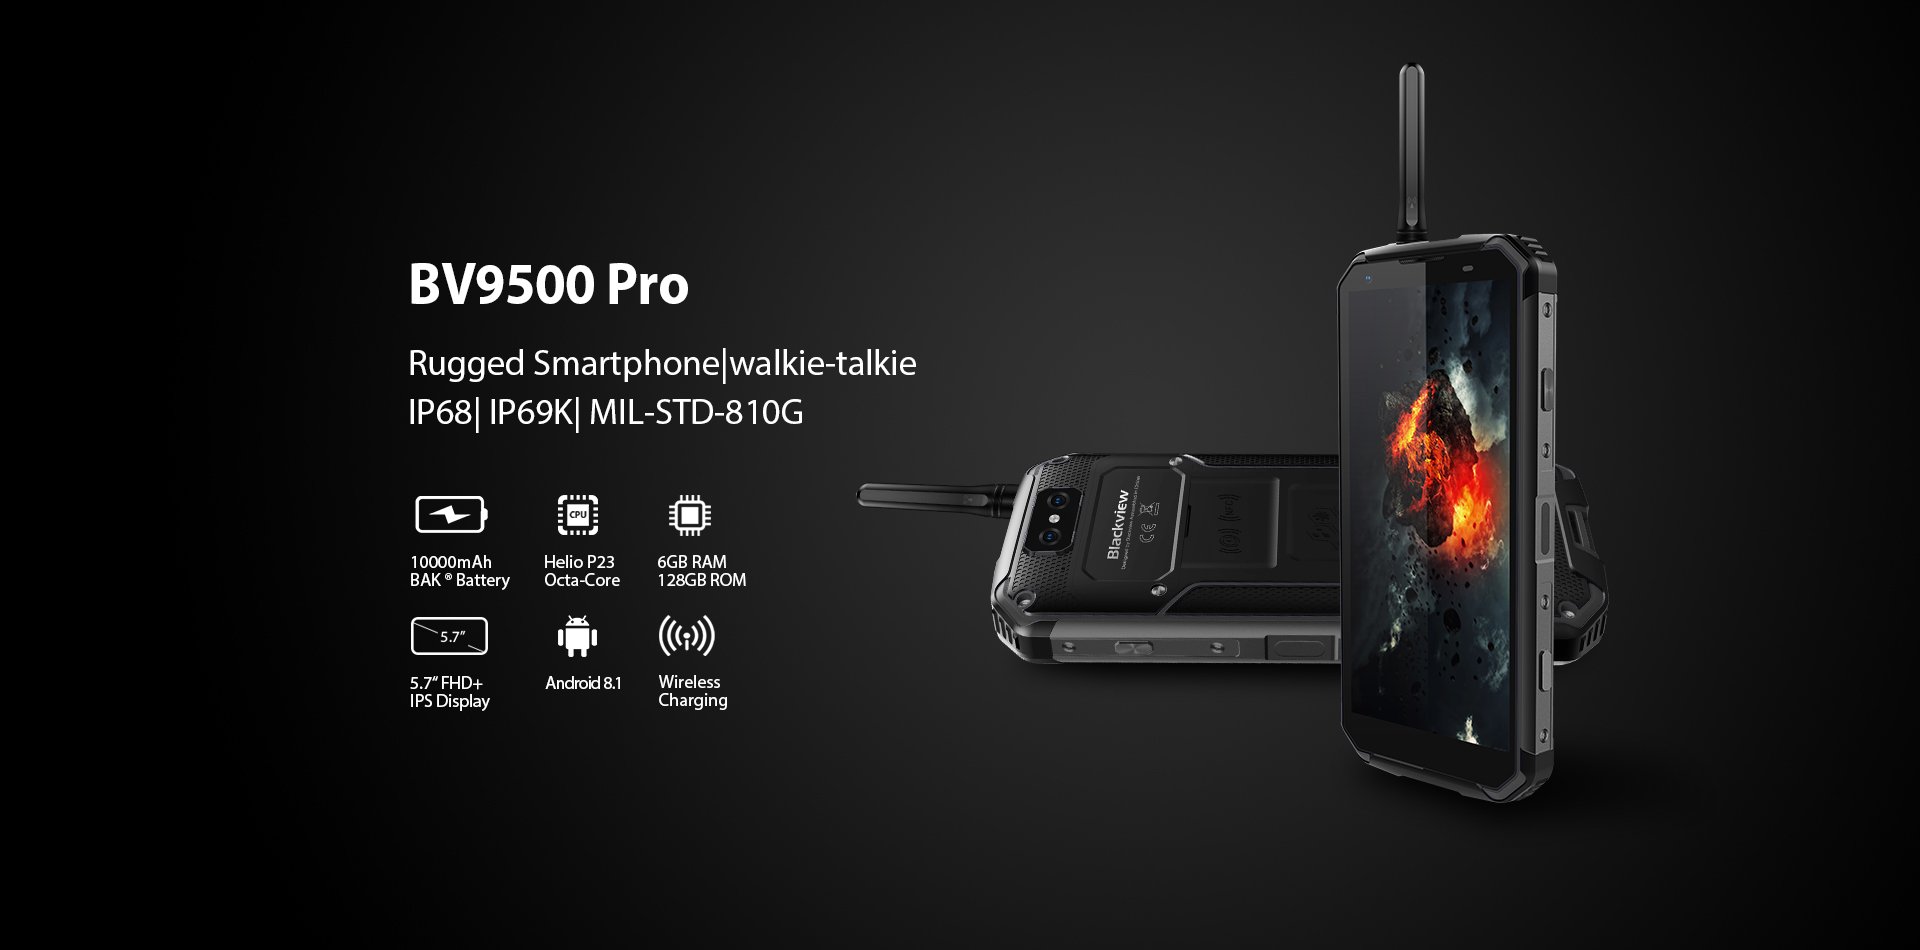 Of the most durable phones, the Blackview BV9500 pro is the most dust resistant